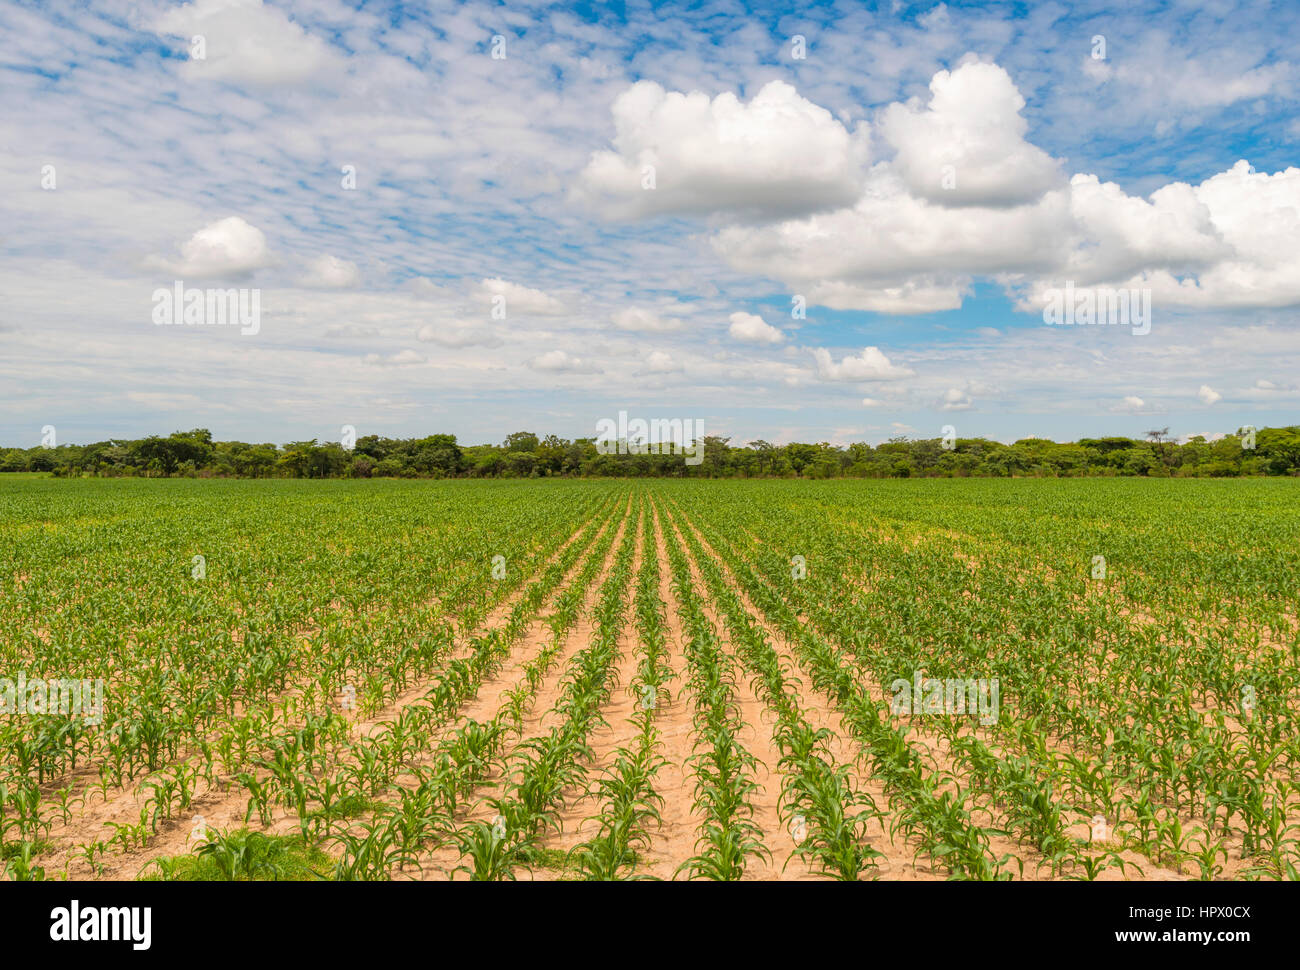 A commercial maize crop in Zimbabwe's Harare South Province. Stock Photo